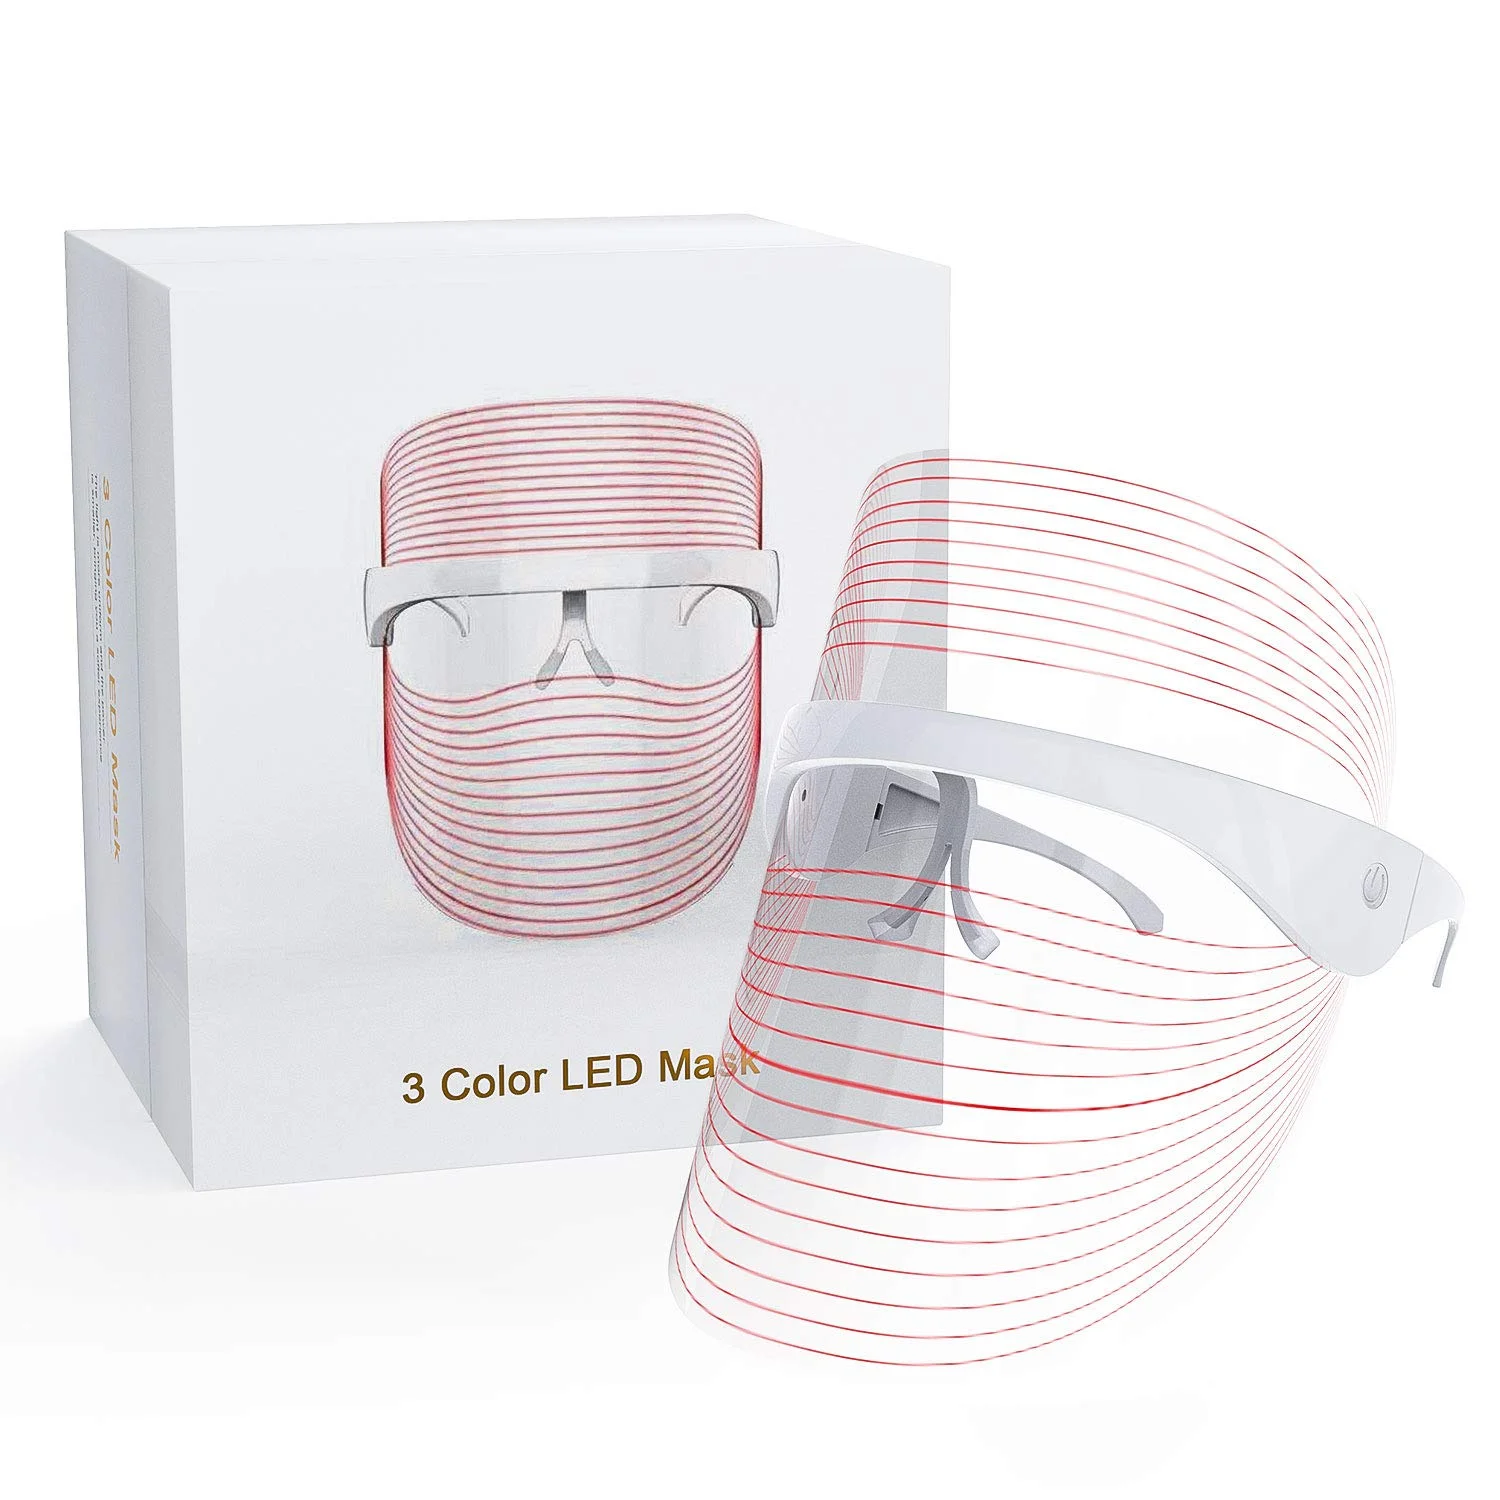 

Facial Infrared LED Mask Photon Wireless Light Therapy Mask Face Beauty Skin Rejuvenation Anti Wrinkle Acne Tighten Led mask